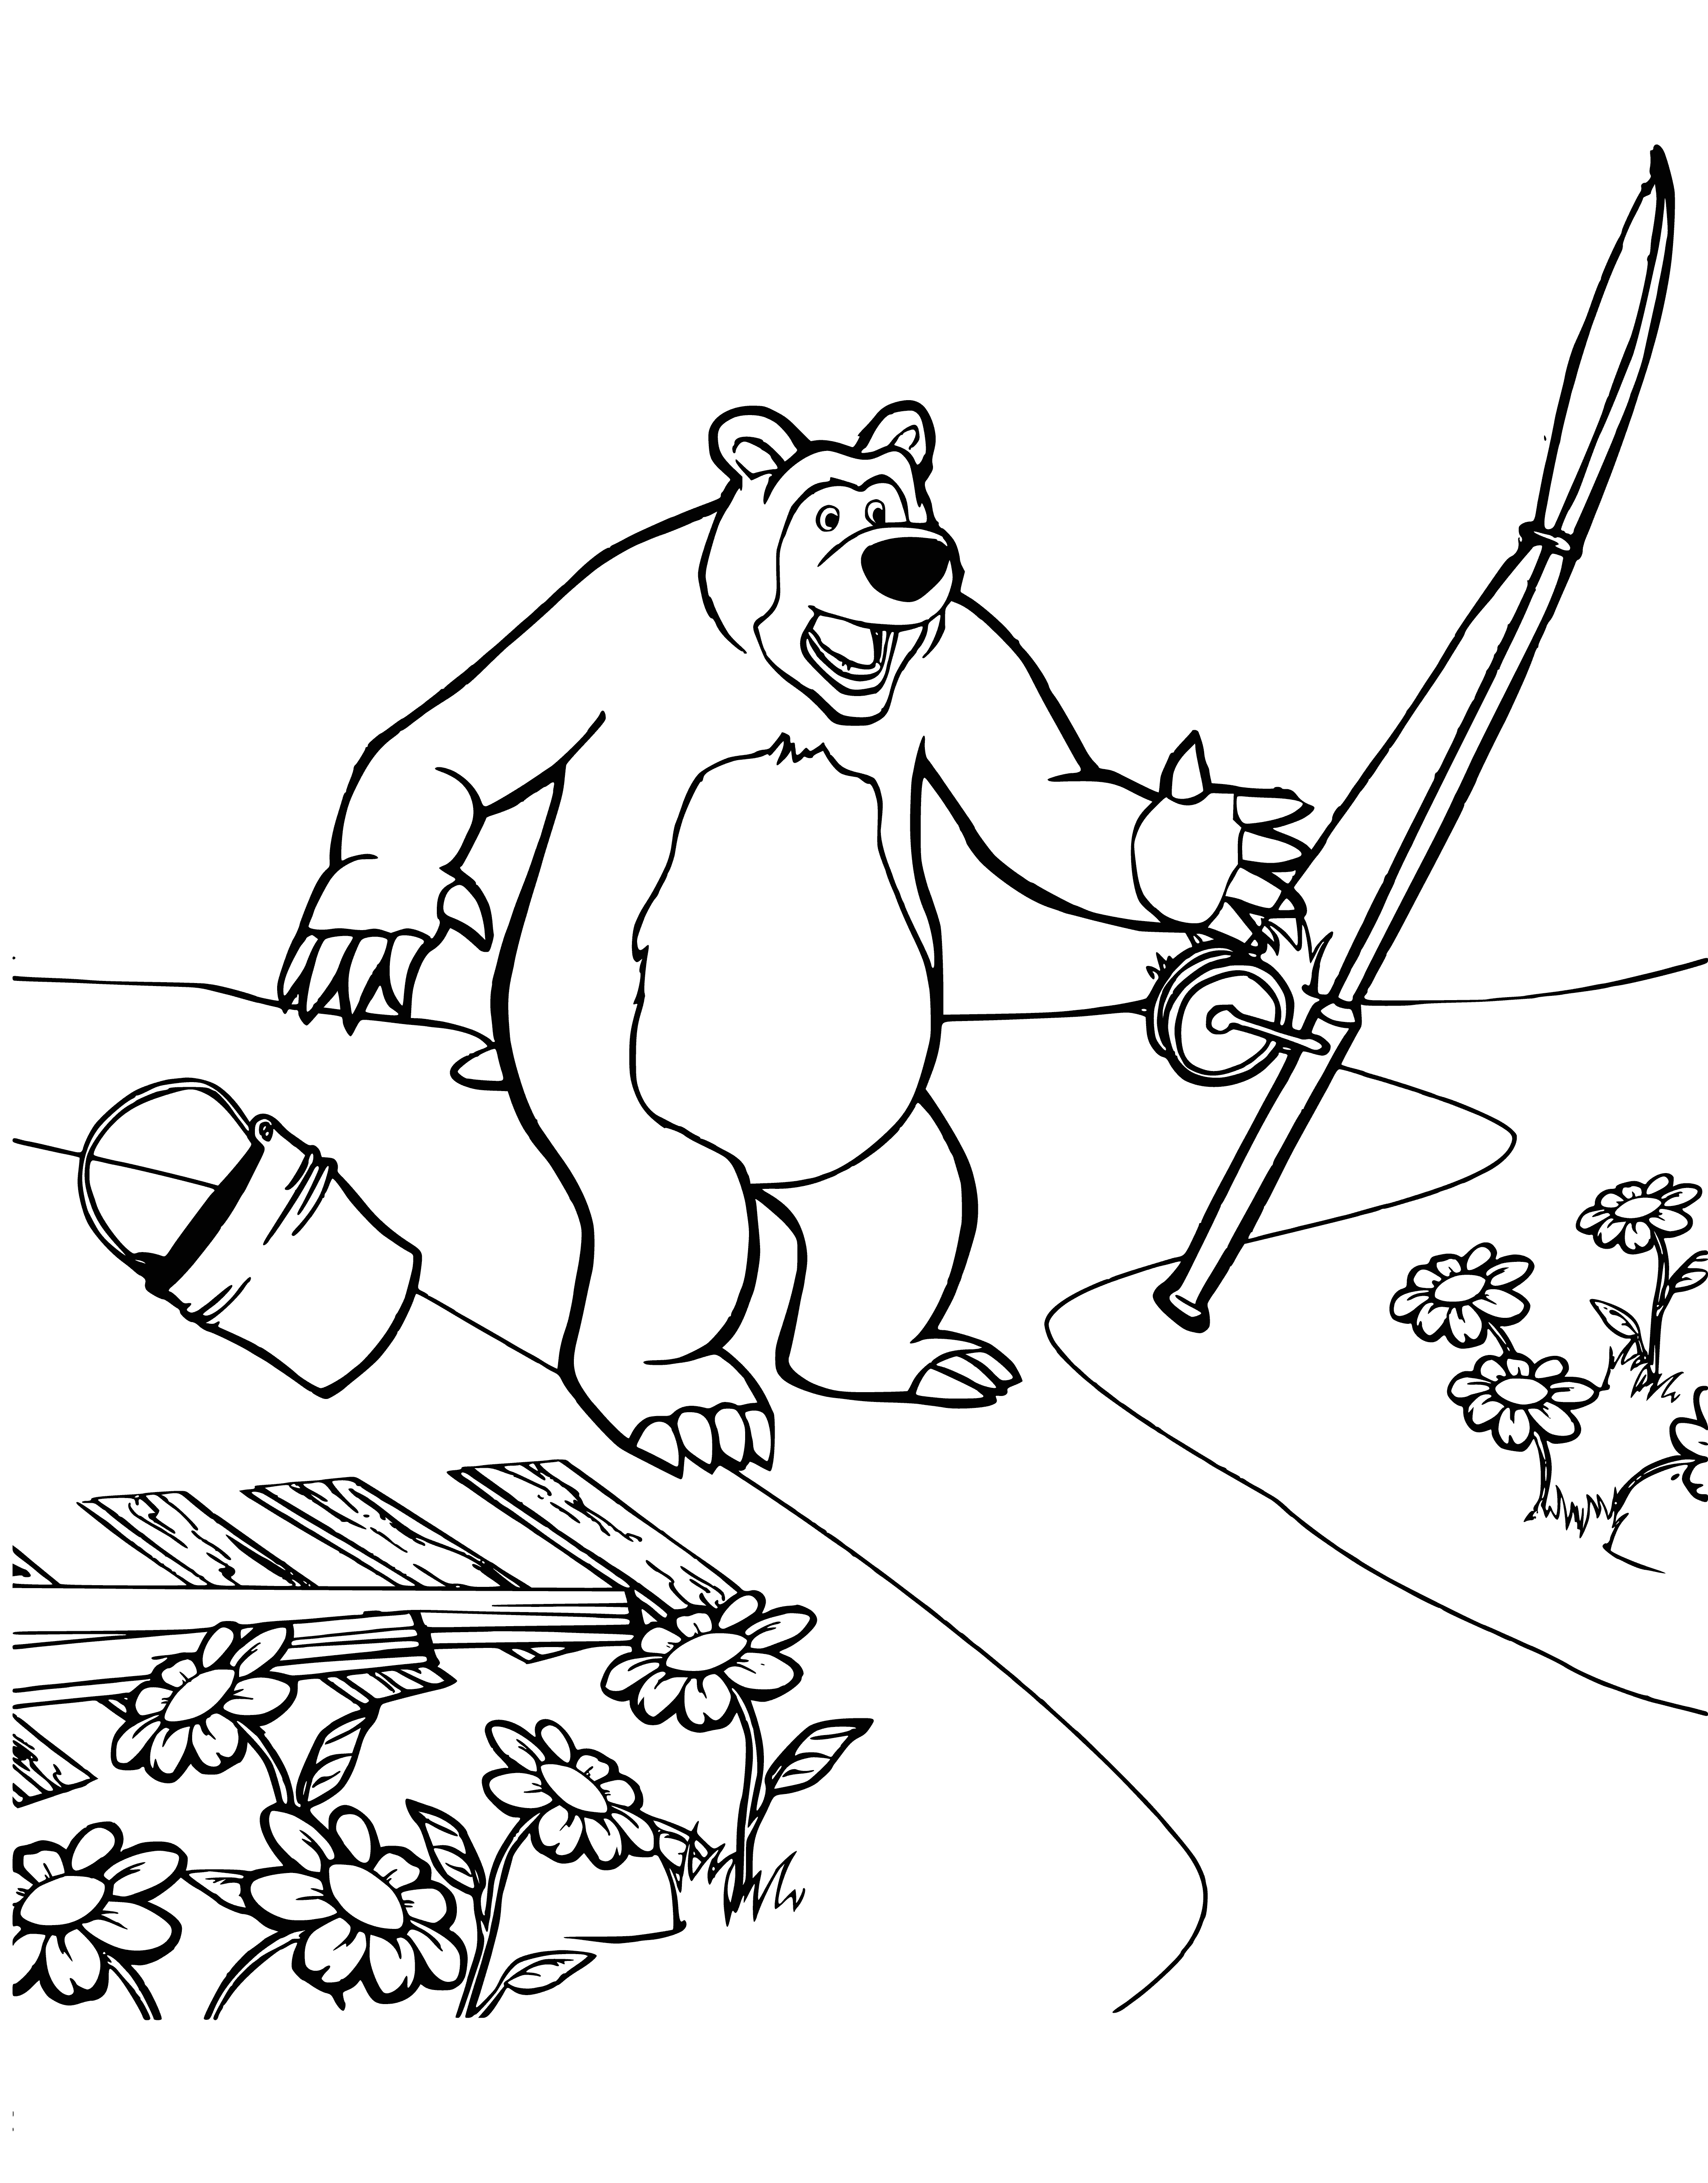 coloring page: Masha stands pointing, scared, at the shocked bear sitting on the ground, mouth open.